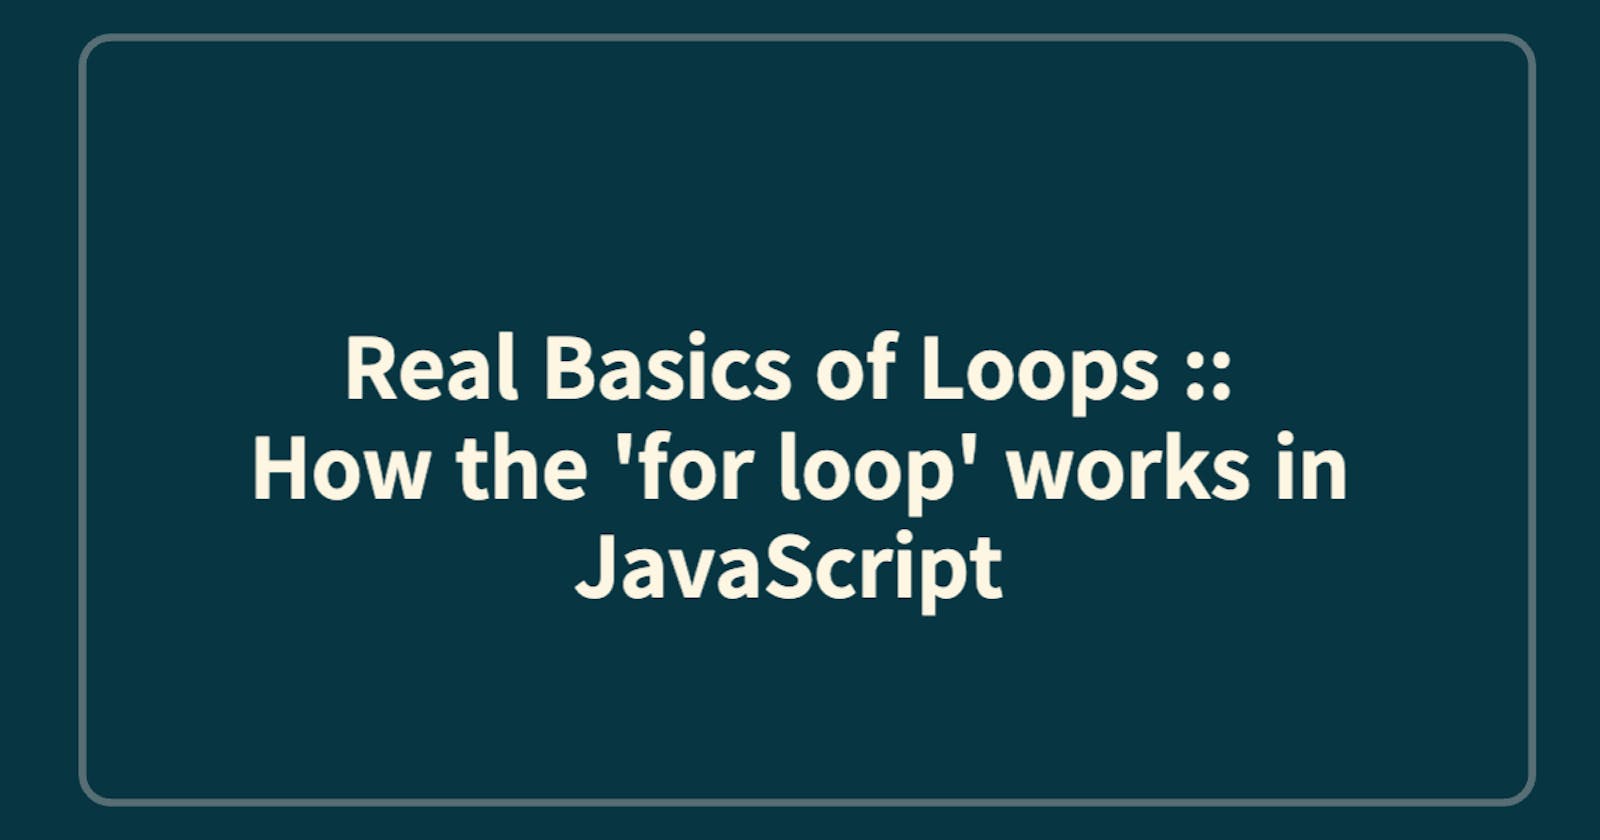 Real Basics of Loops :: How the 'for loop' works in JavaScript